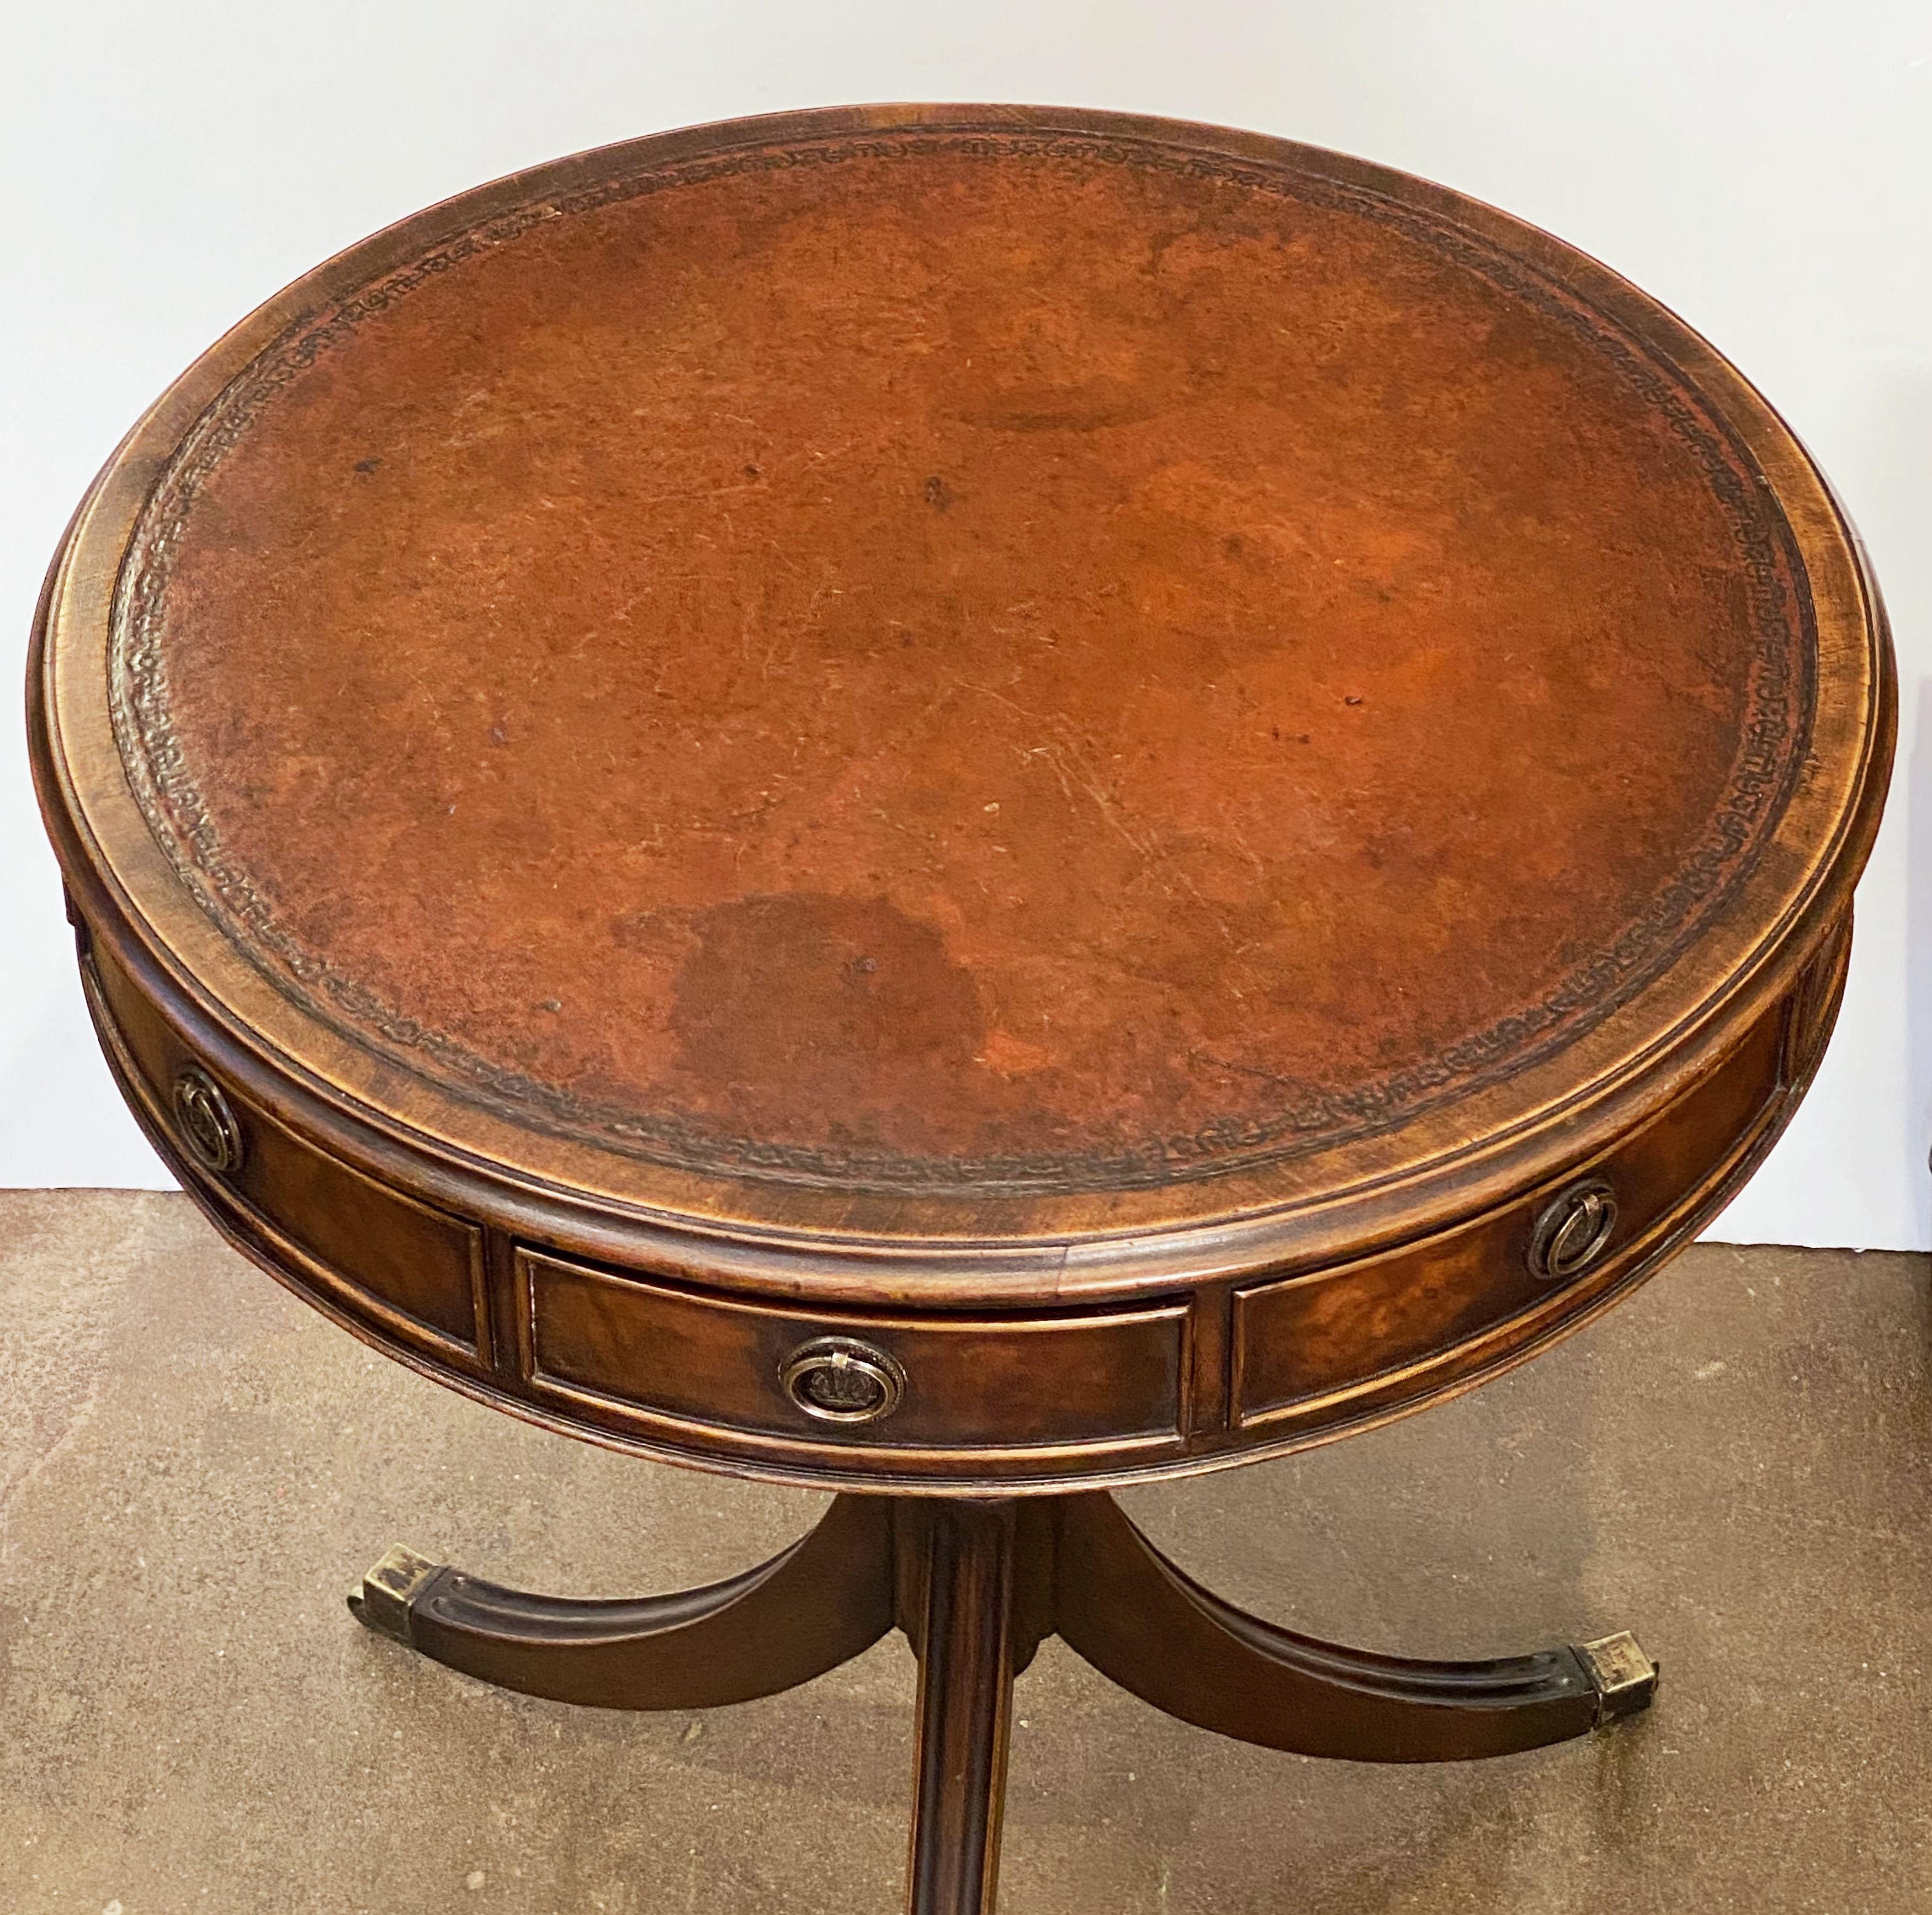 20th Century English Drum Table of Mahogany with Leather Top from the Edwardian Era For Sale